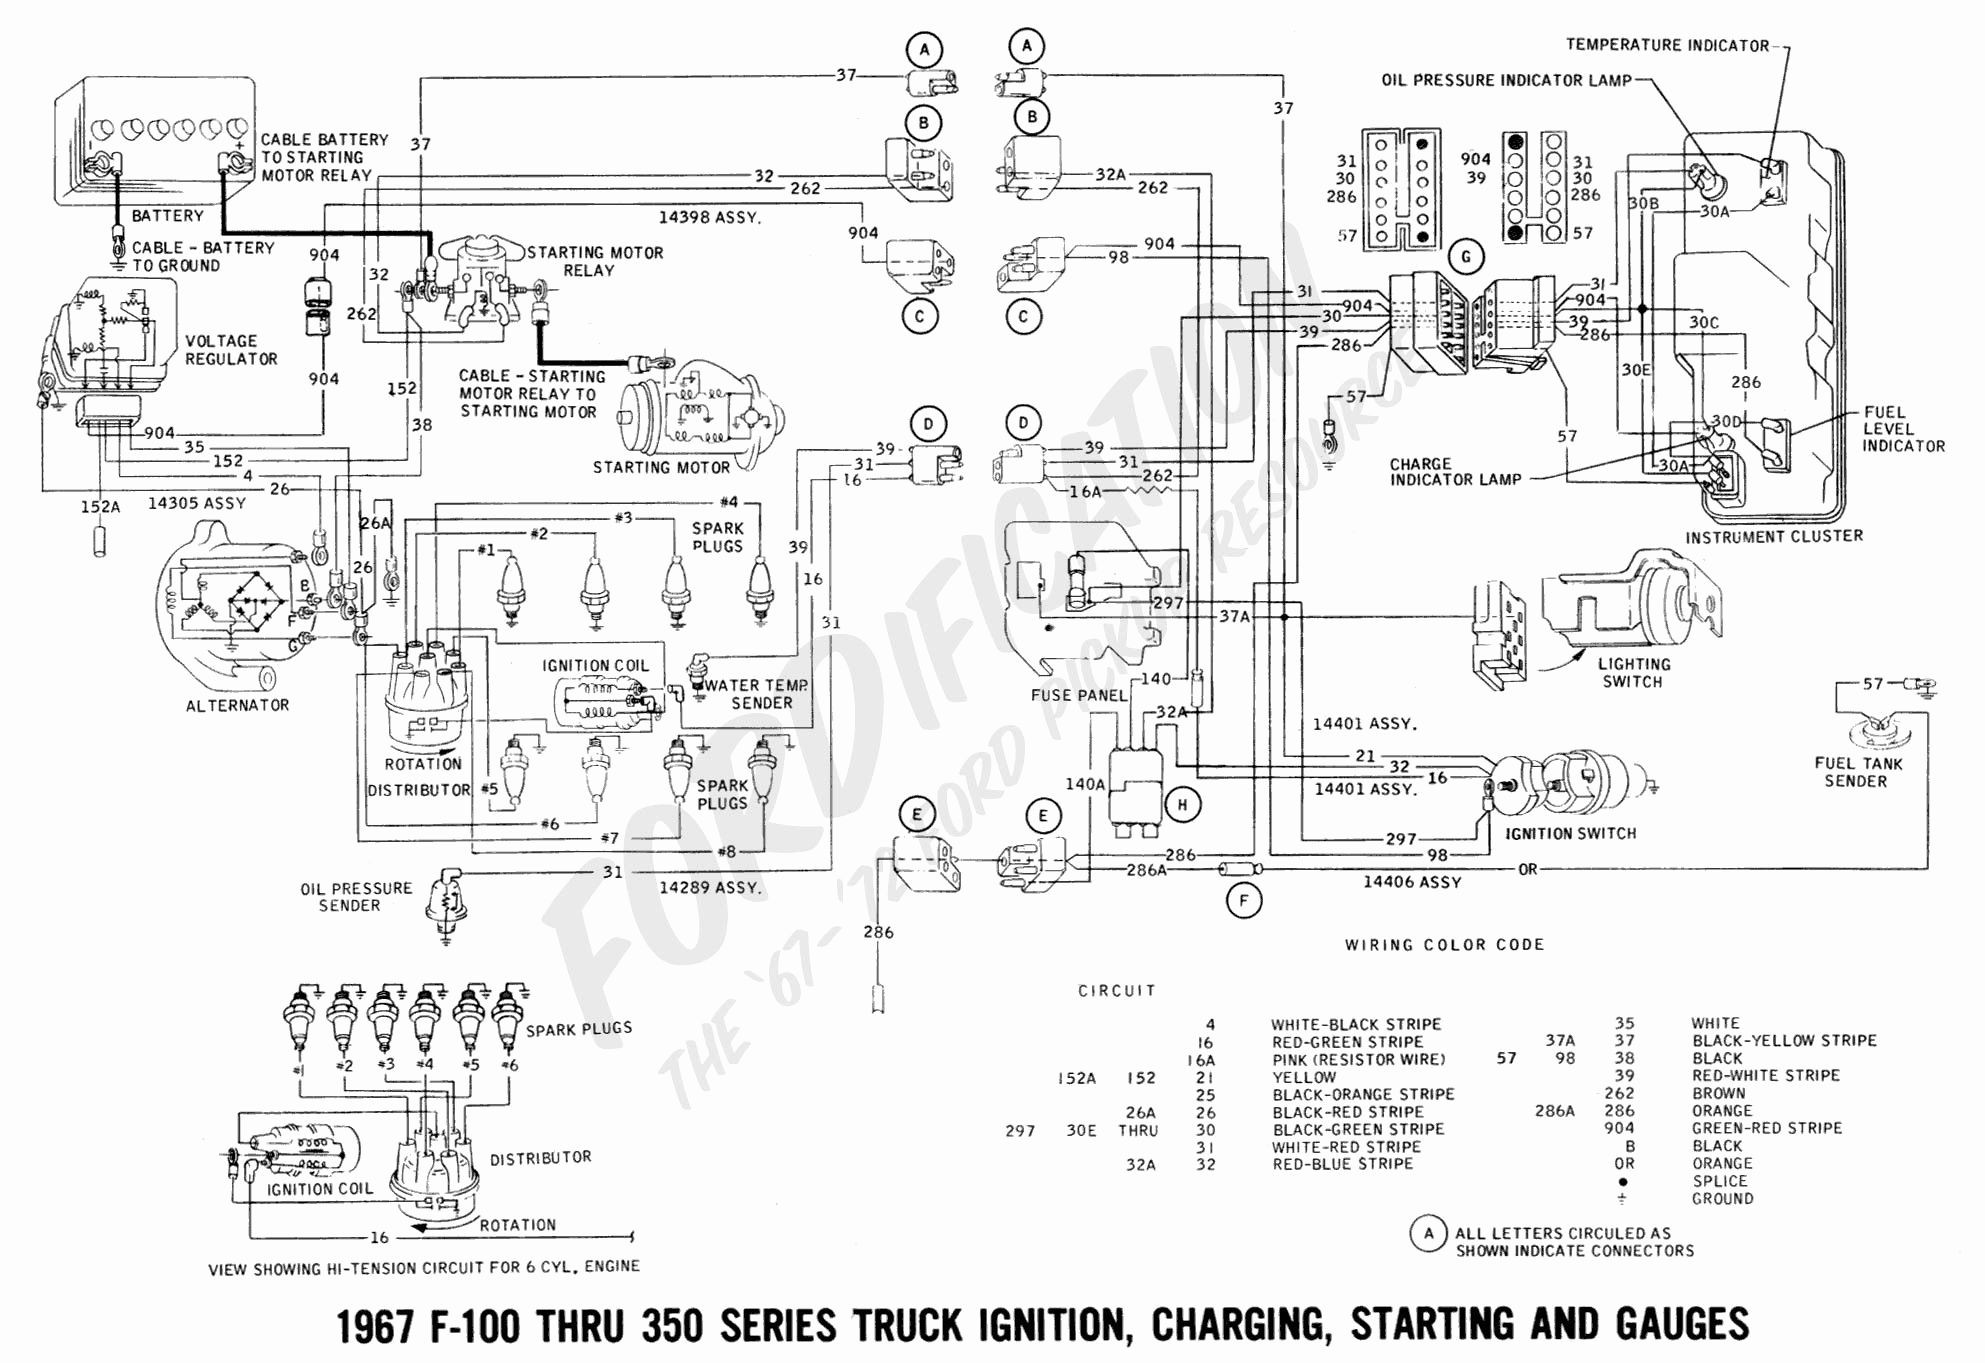 1999 ford Expedition Engine Diagram 2 Used 2002 F250 Wiring Harness Another Blog About Wiring Diagram • Of 1999 ford Expedition Engine Diagram 2